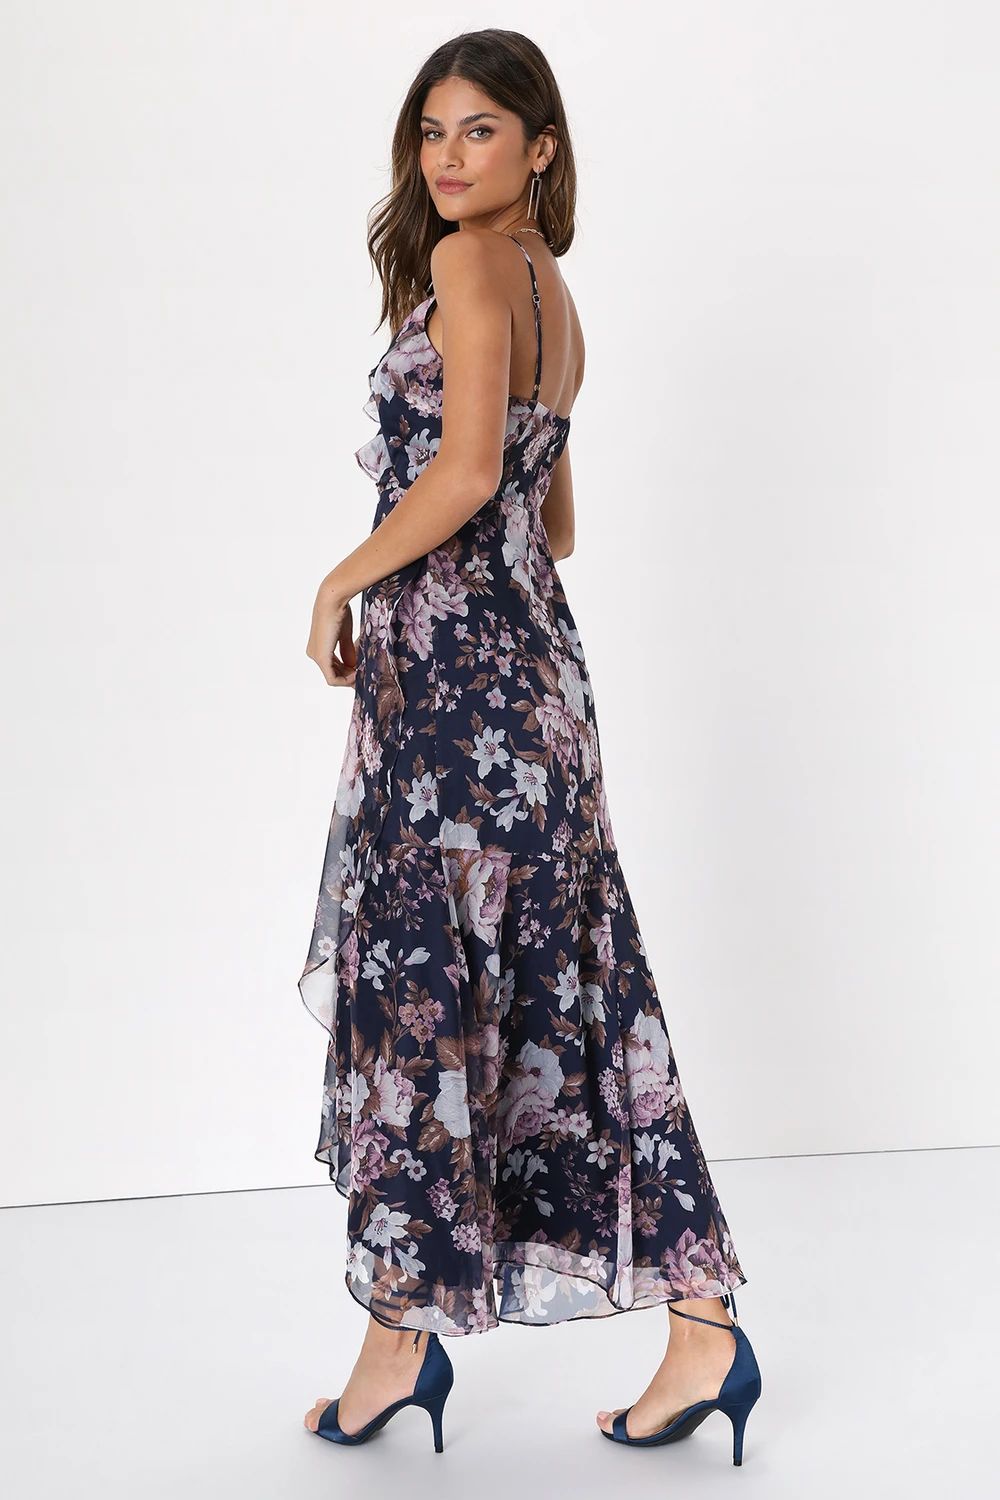 Dainty Love Navy Blue Floral Ruffled High-Low Faux-Wrap Dress | Lulus (US)